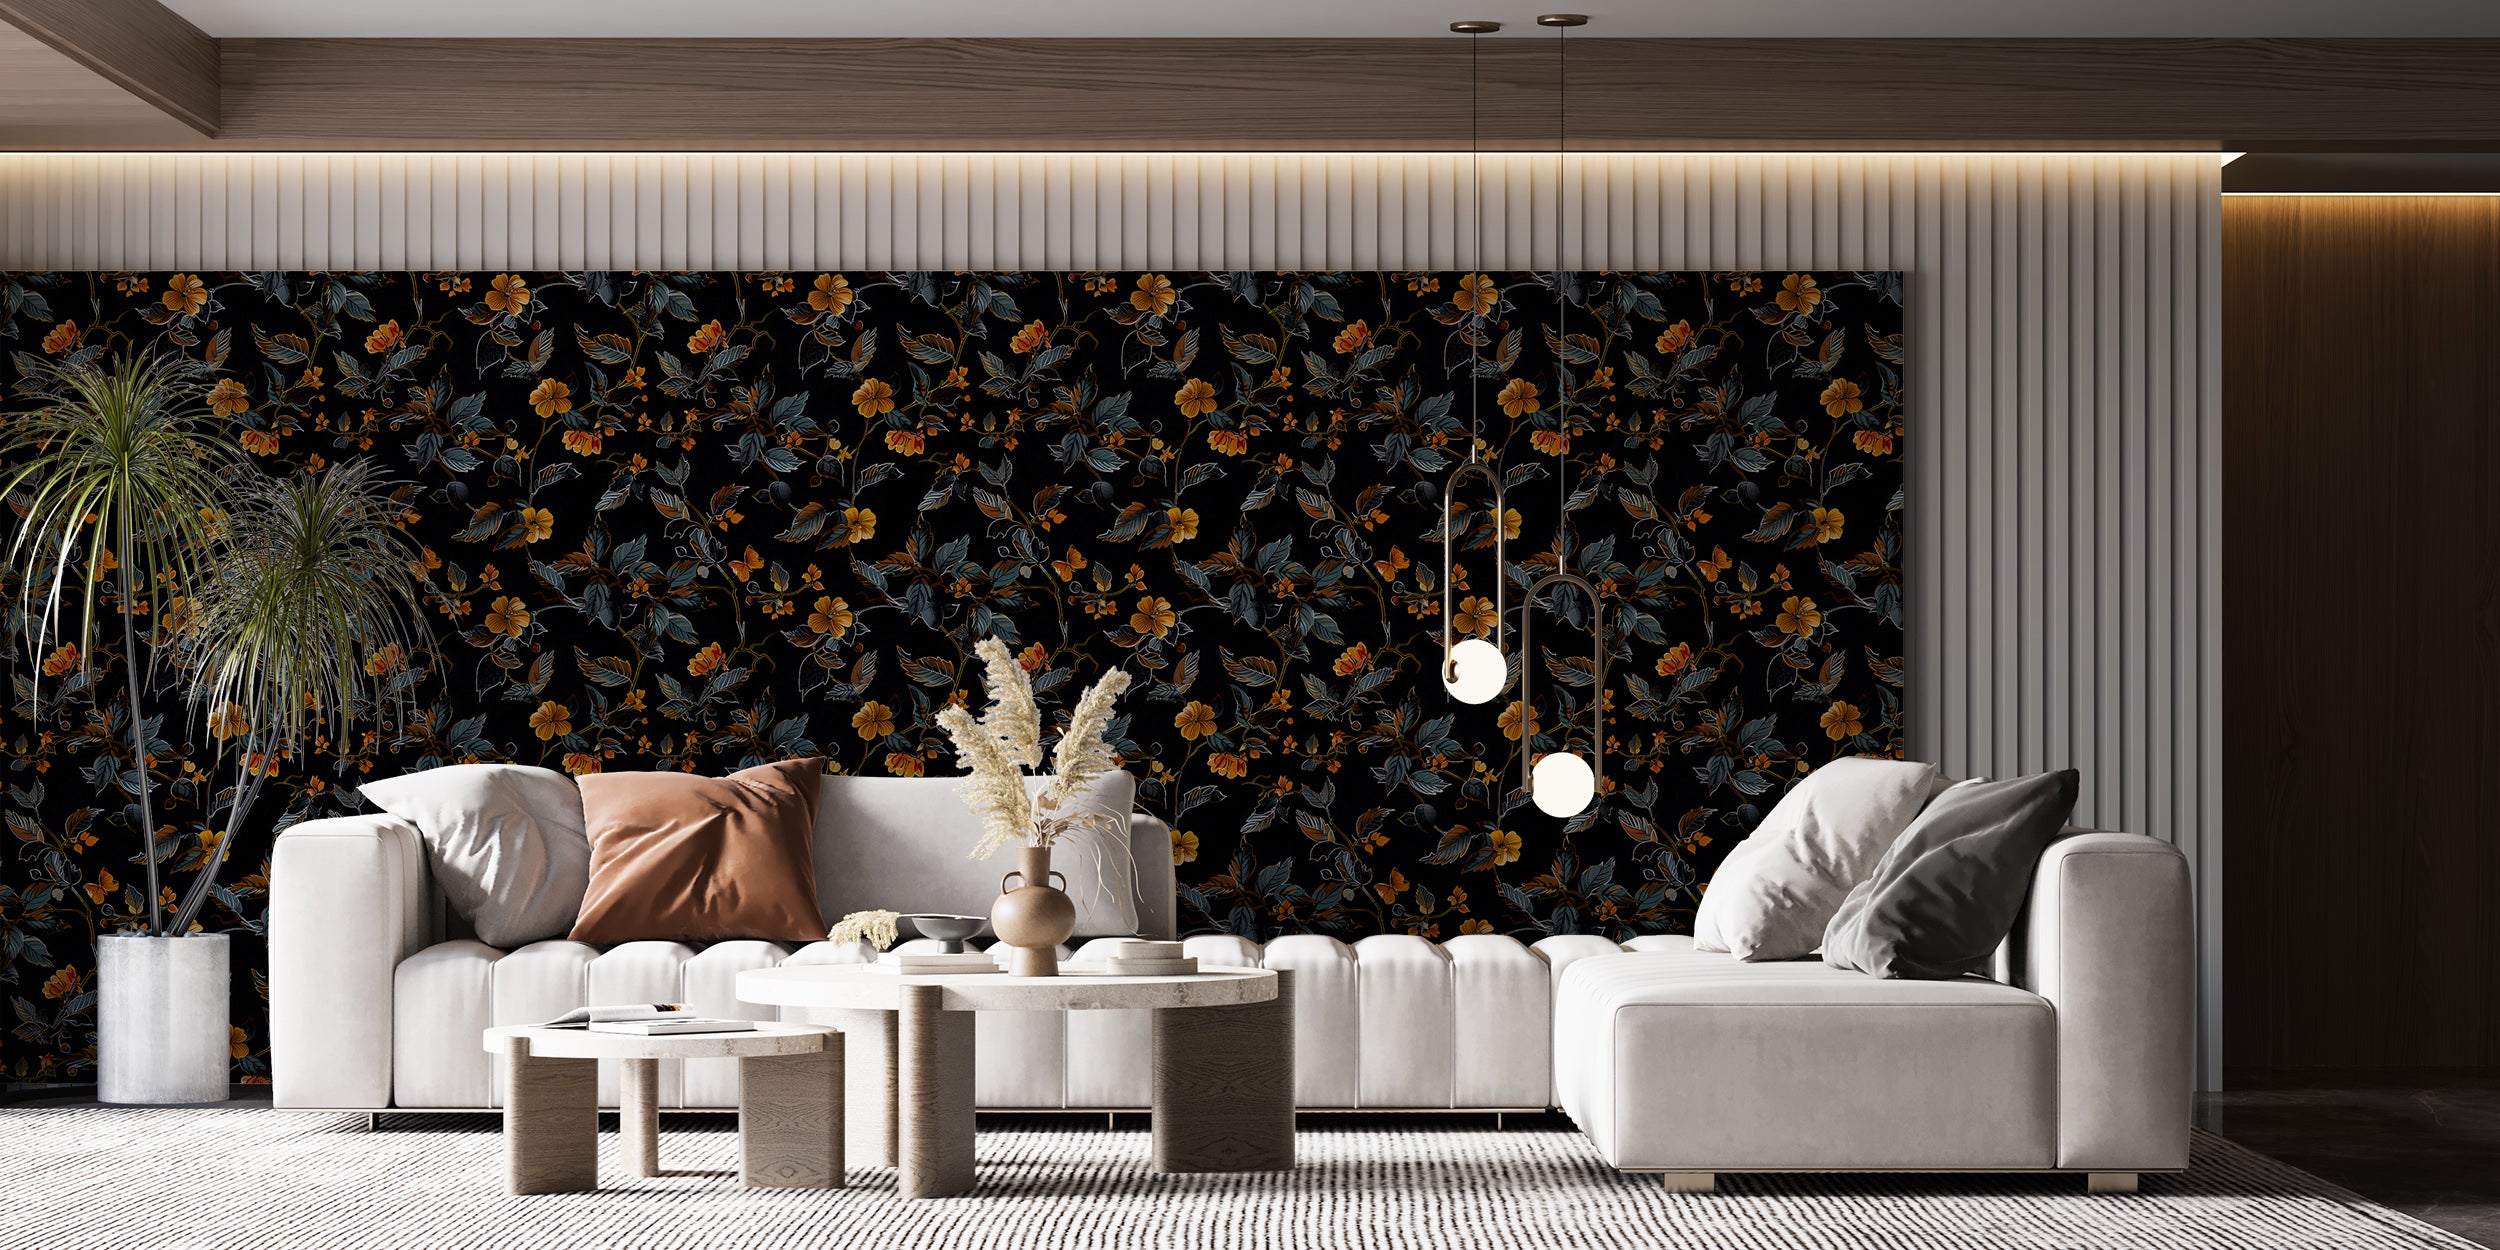 Abstract Dark Floral Wallpaper, Black and Orange Botanical Wallpaper, Peel and Stick Orange Flowers Wall Decal, Removable Floral Decor